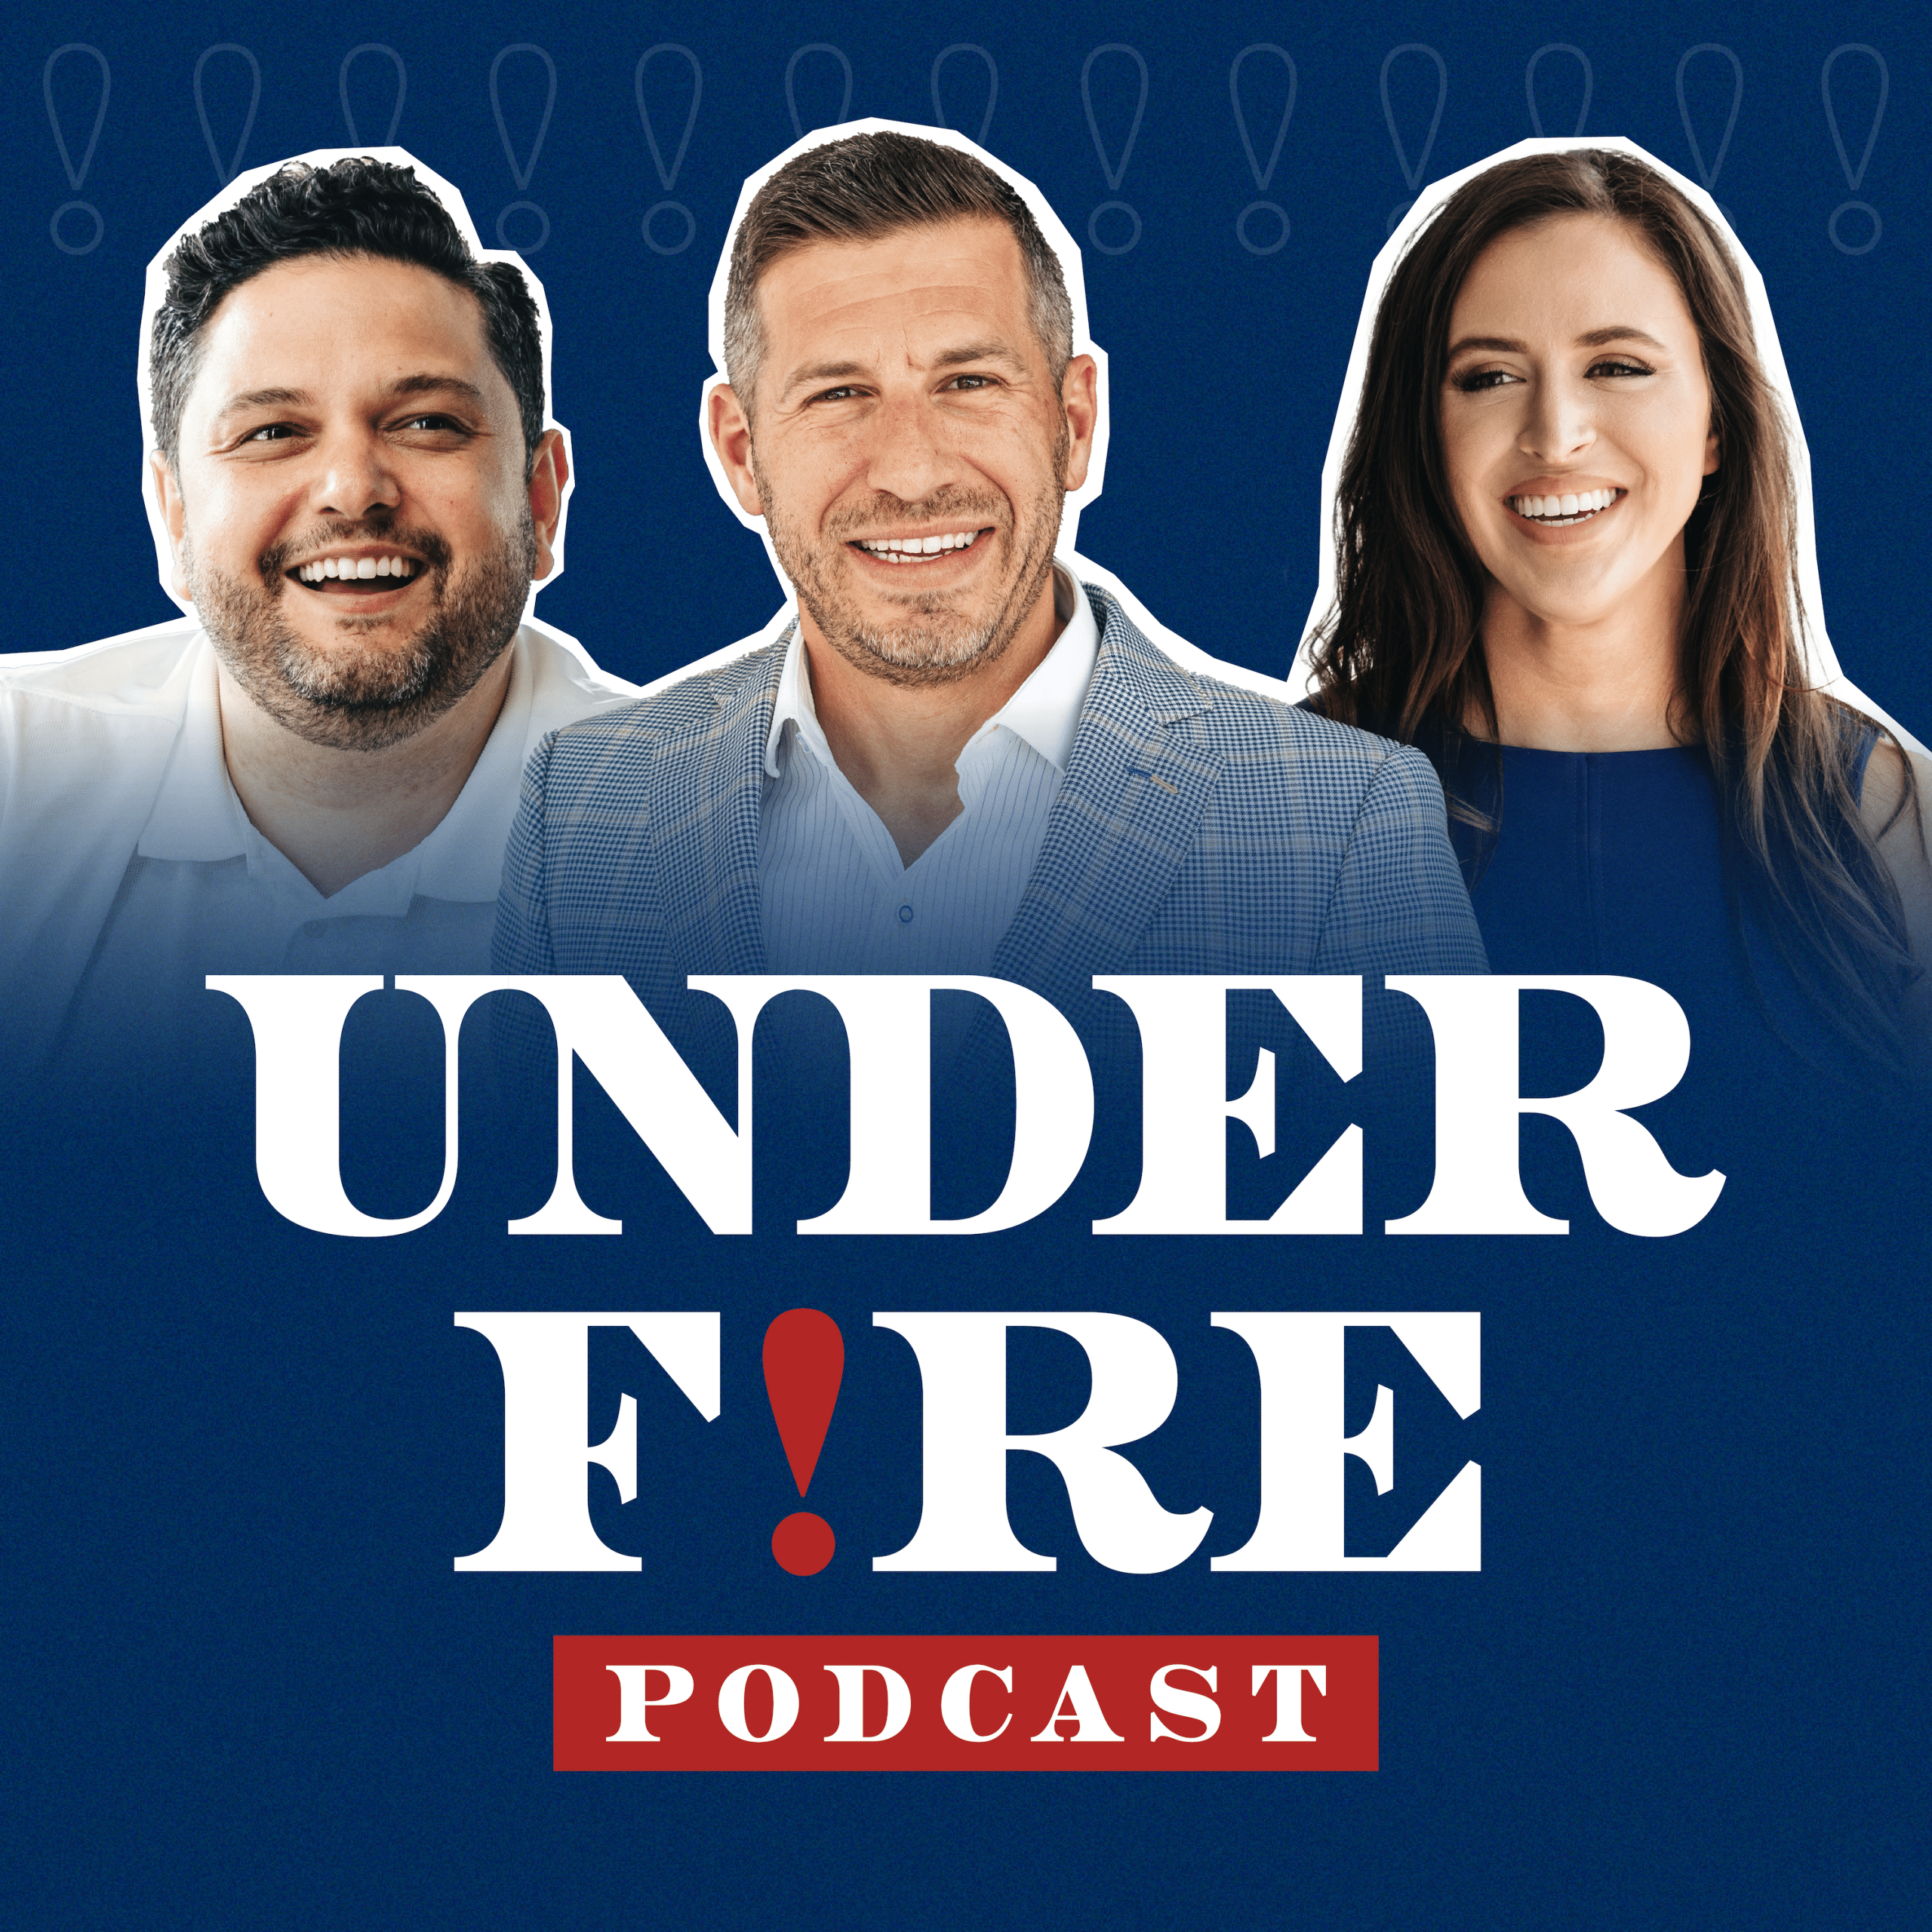 The Podcast cover of Under Fire with Wesley Donehue, Phil Vangelakos, and Christiana Purves.